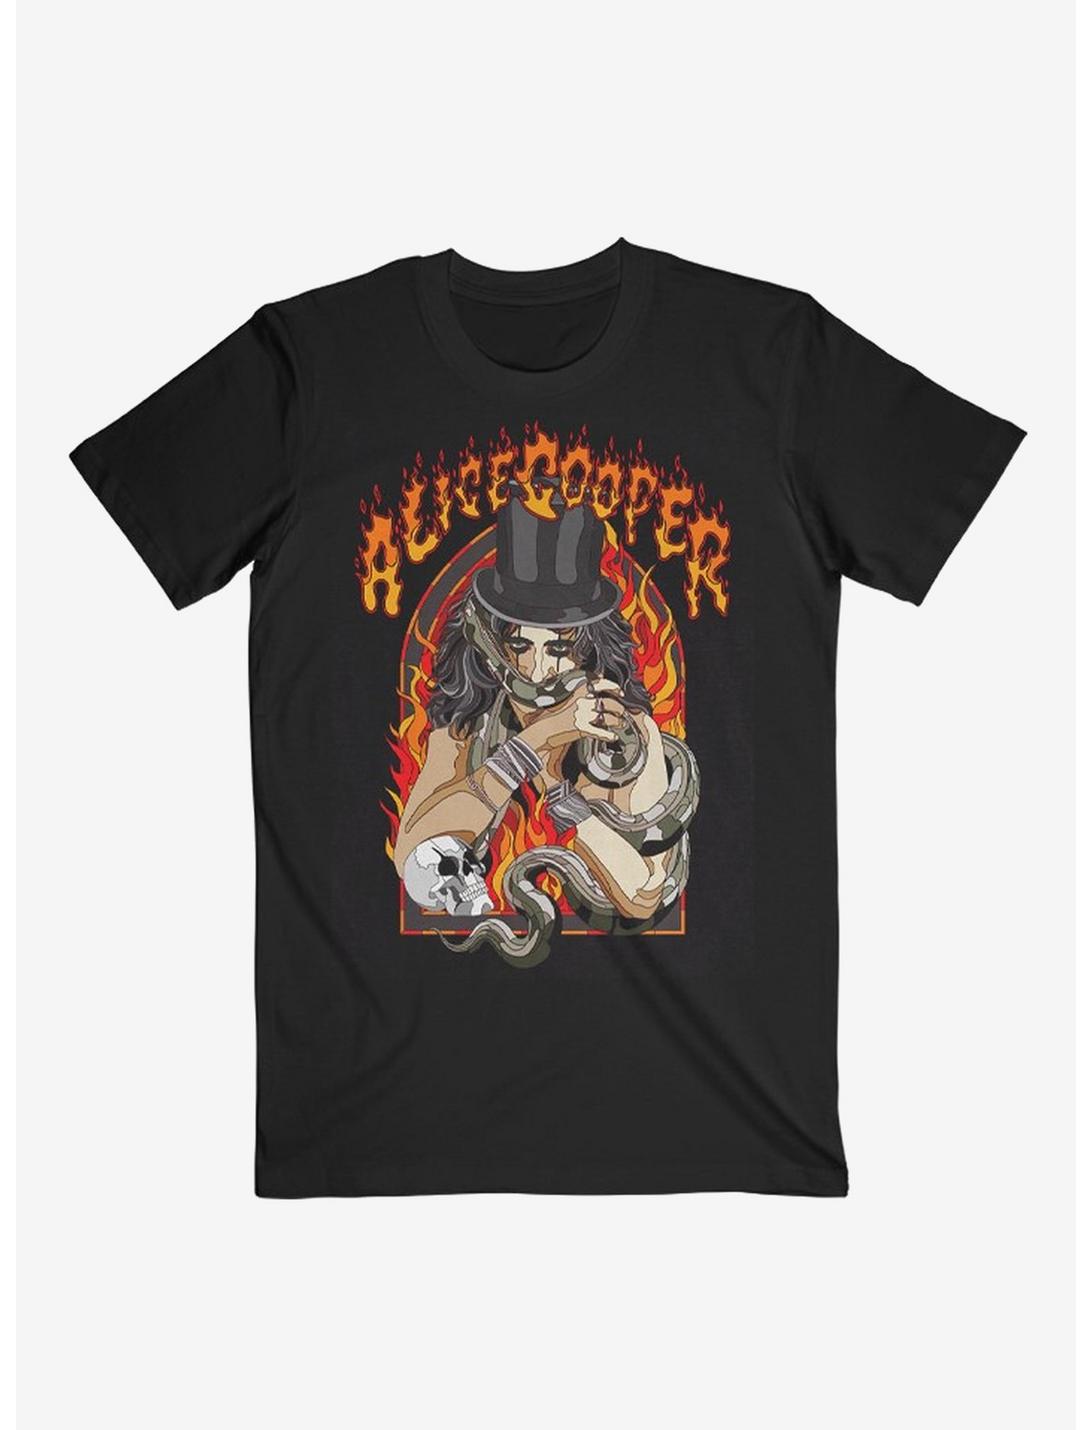 Alice Cooper Snake Stained Glass Boyfriend Fit Girls T-Shirt, BLACK, hi-res